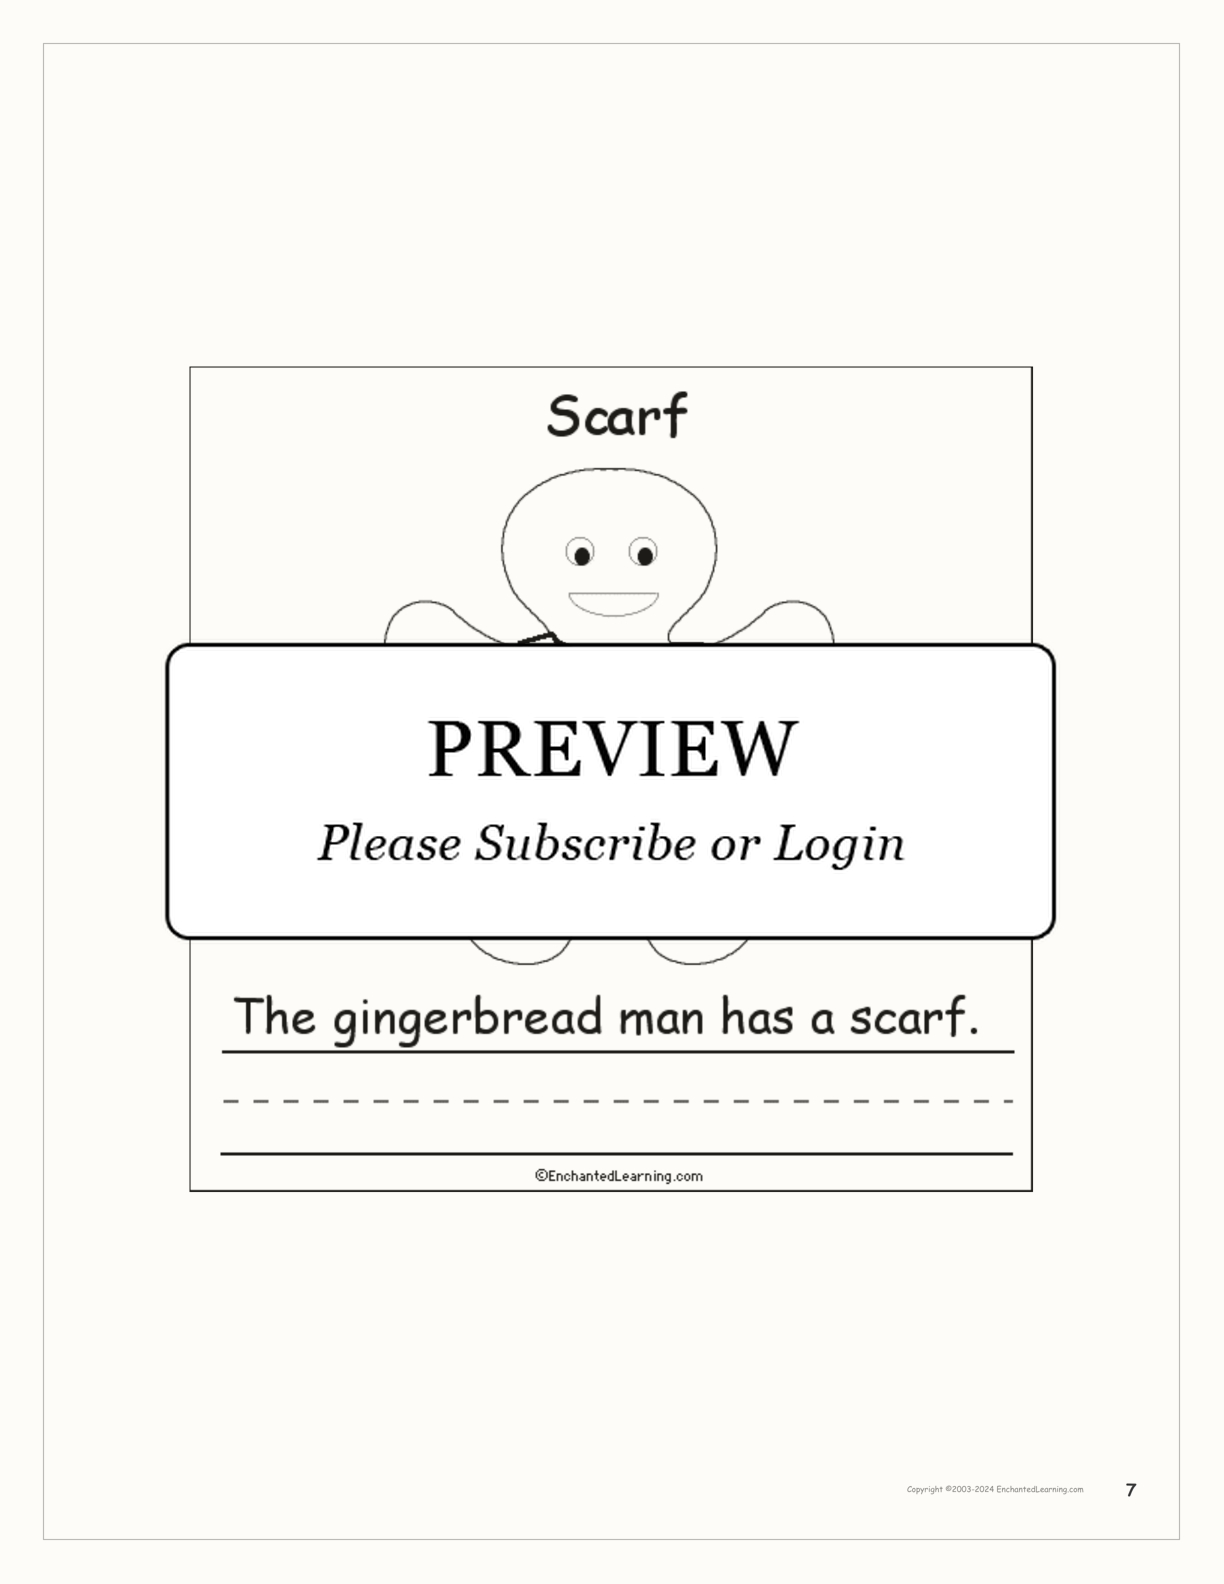 The Gingerbread Man's Clothes: Early Reader Book interactive worksheet page 7